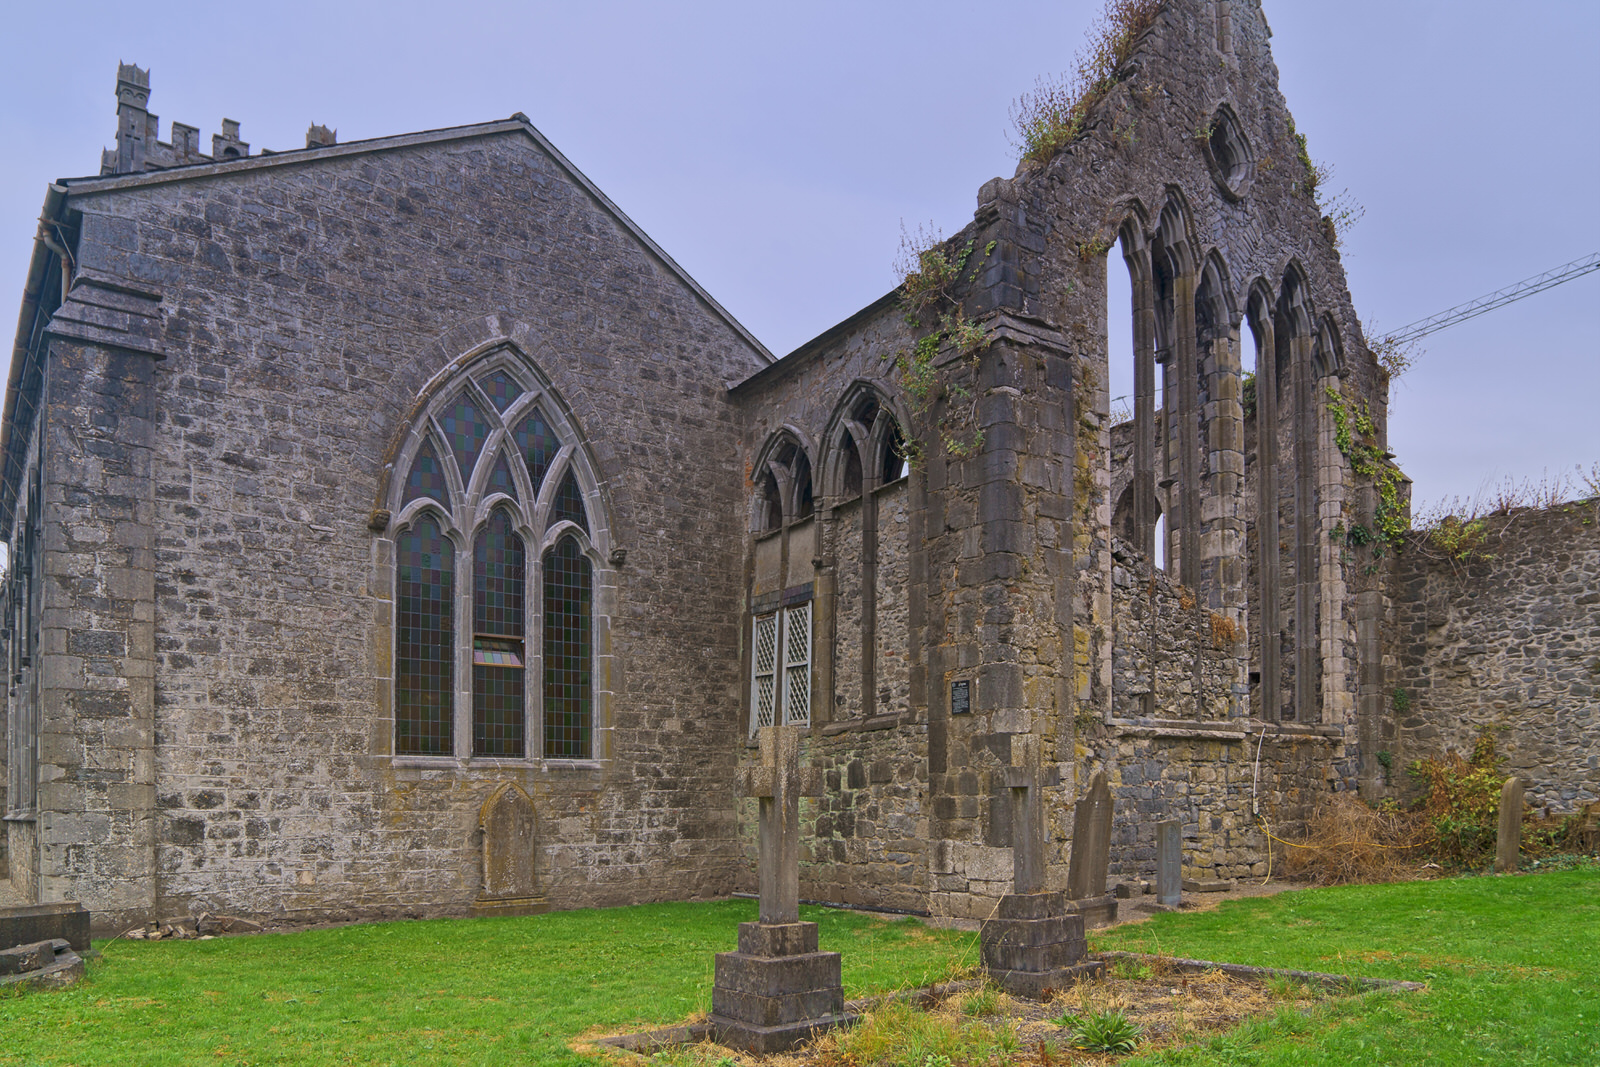 THE OLDER ST JOHN'S CHURCH IN KILKENNY AUGUST 2018 [ANGLICAN COMMUNION]-234327-1